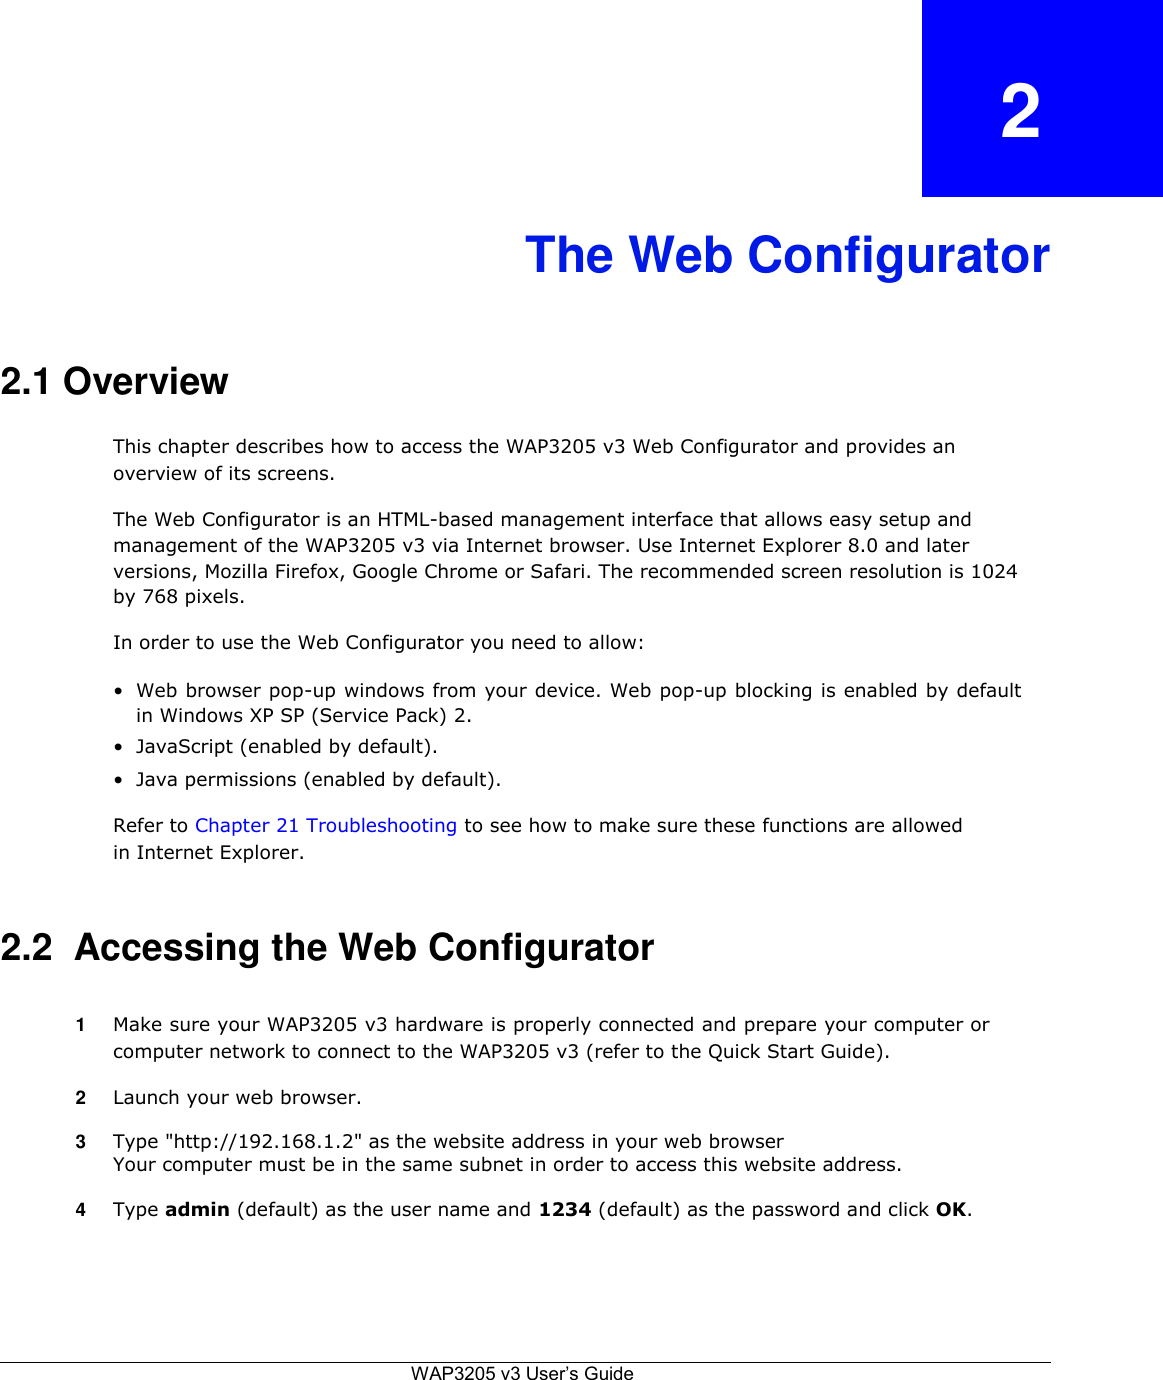 2    The Web Configurator    2.1 Overview  This chapter describes how to access the WAP3205 v3 Web Configurator and provides an overview of its screens.  The Web Configurator is an HTML-based management interface that allows easy setup and management of the WAP3205 v3 via Internet browser. Use Internet Explorer 8.0 and later versions, Mozilla Firefox, Google Chrome or Safari. The recommended screen resolution is 1024 by 768 pixels.  In order to use the Web Configurator you need to allow:  • Web browser pop-up windows from your device. Web pop-up blocking is enabled by default in Windows XP SP (Service Pack) 2.  • JavaScript (enabled by default).  • Java permissions (enabled by default).  Refer to Chapter 21 Troubleshooting to see how to make sure these functions are allowed in Internet Explorer.   2.2  Accessing the Web Configurator   1  Make sure your WAP3205 v3 hardware is properly connected and prepare your computer or computer network to connect to the WAP3205 v3 (refer to the Quick Start Guide).  2  Launch your web browser.  3  Type &quot;http://192.168.1.2&quot; as the website address in your web browser Your computer must be in the same subnet in order to access this website address.   4  Type admin (default) as the user name and 1234 (default) as the password and click OK.       WAP3205 v3 User’s Guide   